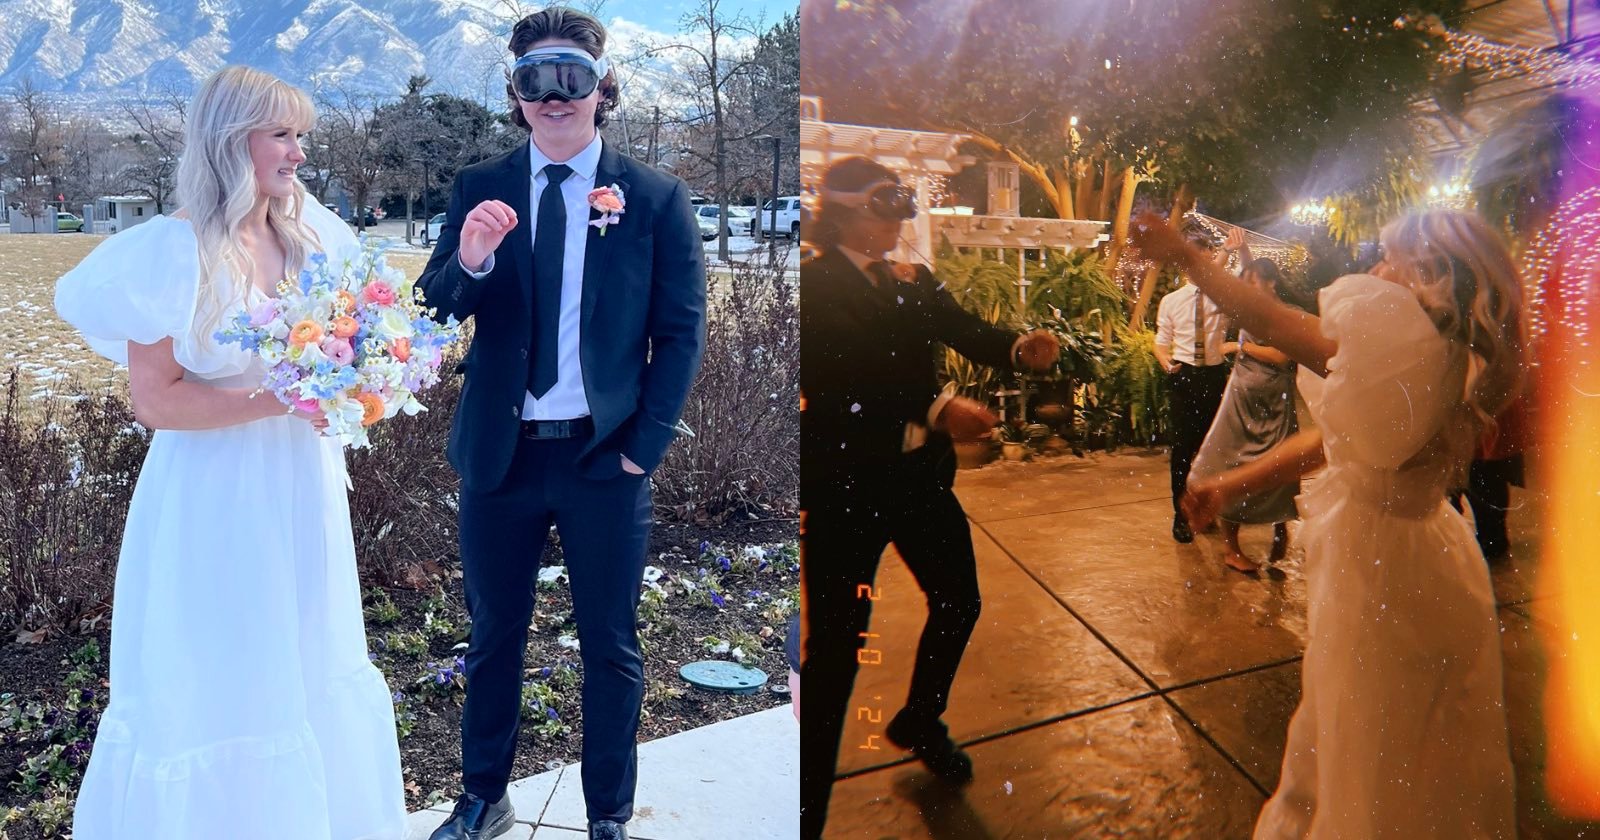 Groom Wears Apple’s Vision Pro Headset on His Wedding Day